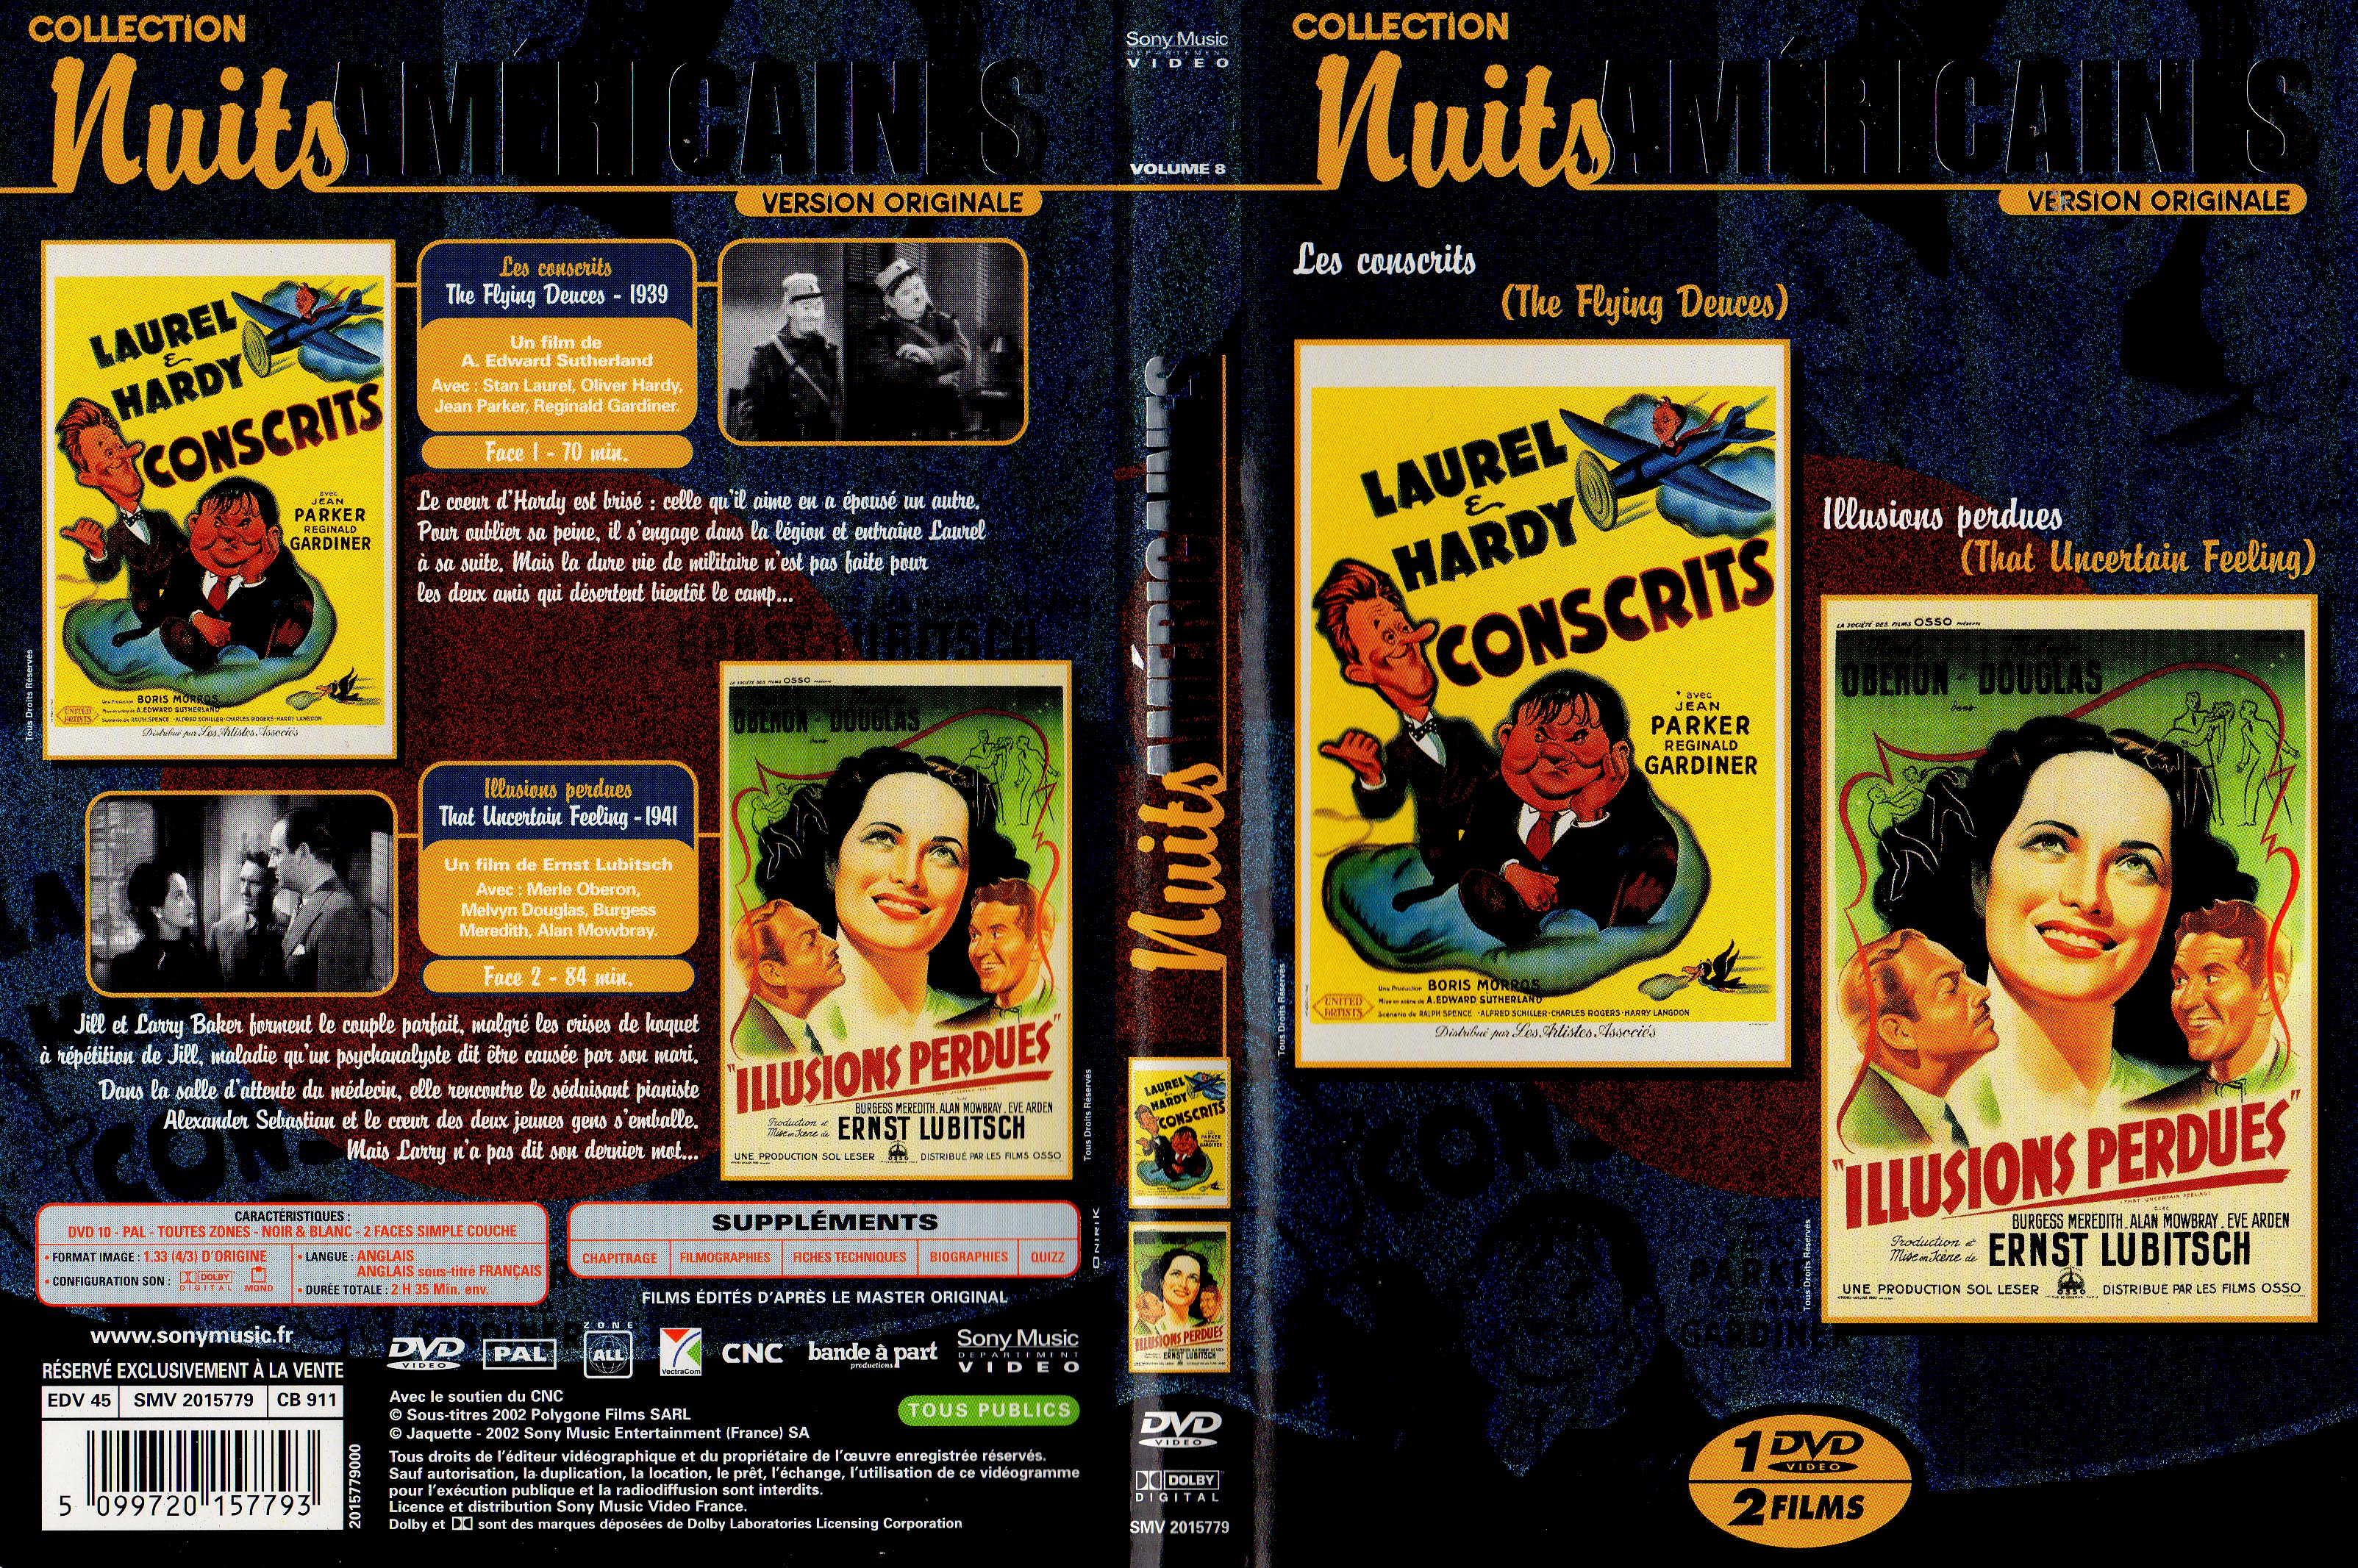 Jaquette DVD Collection nuits americaines - Les conscrits - Illusions perdues